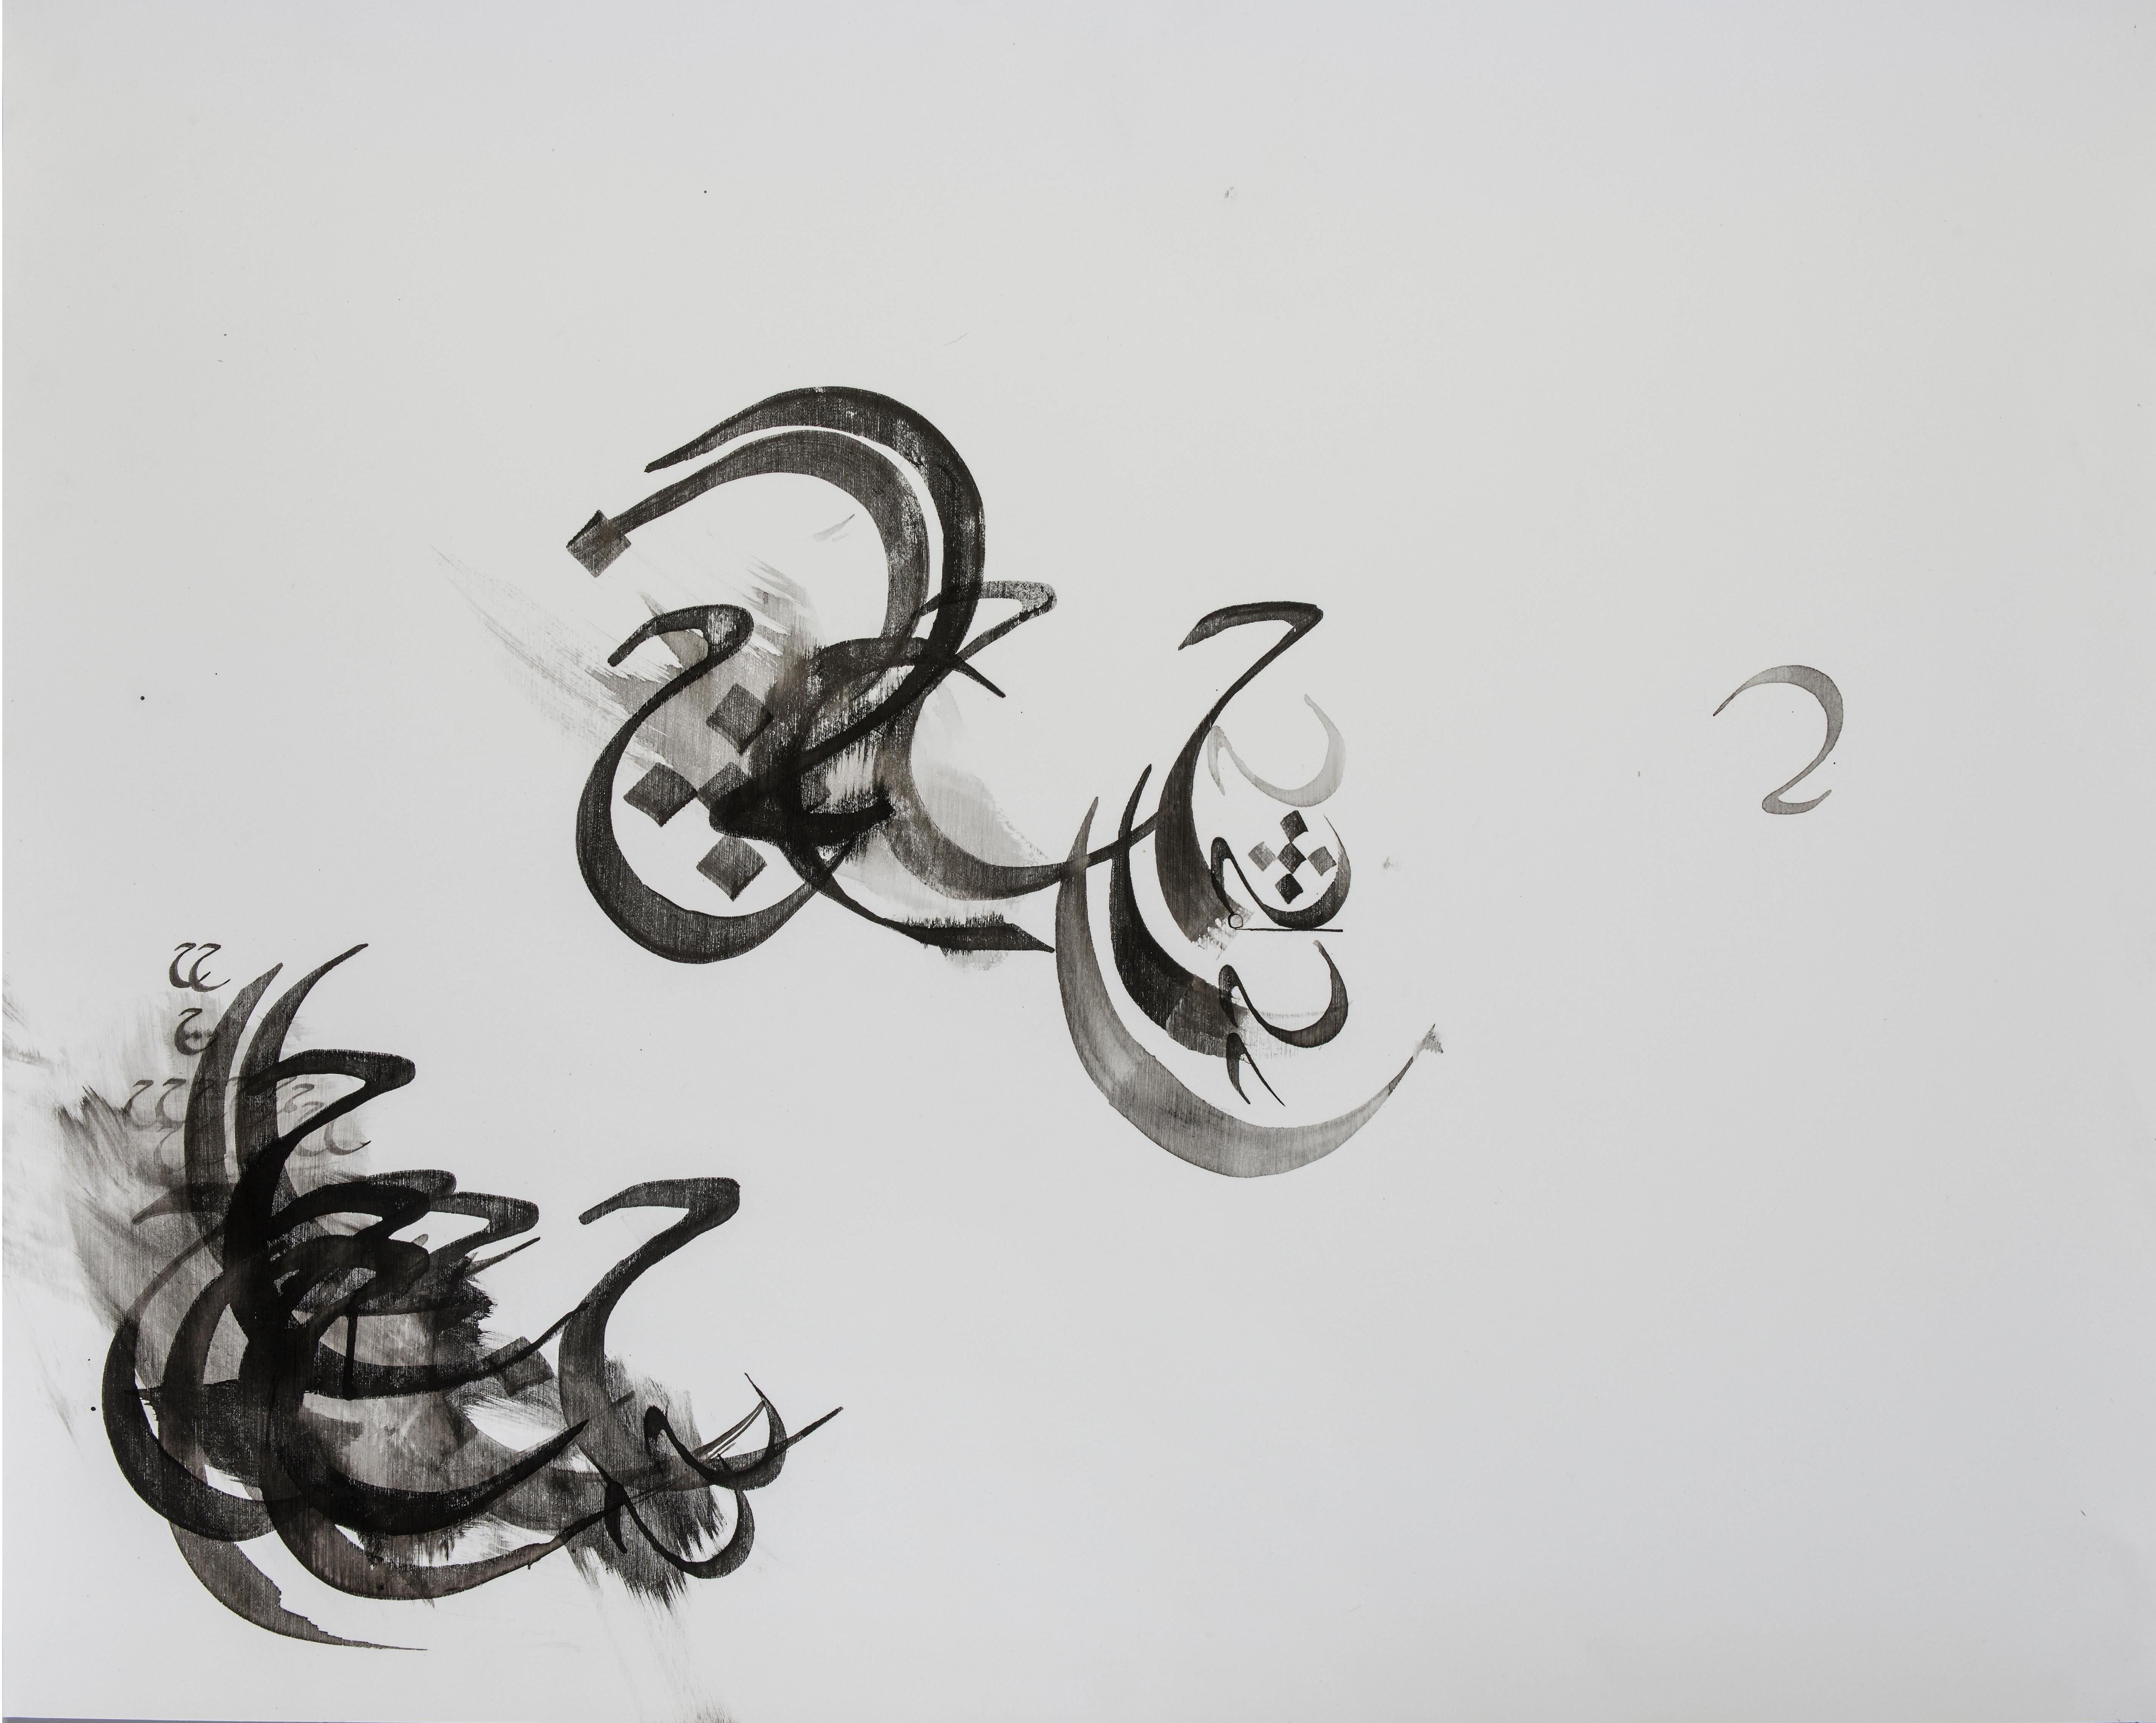 Etude 6 - abstract calligraphy ink drawing / painting on paper, in black & white